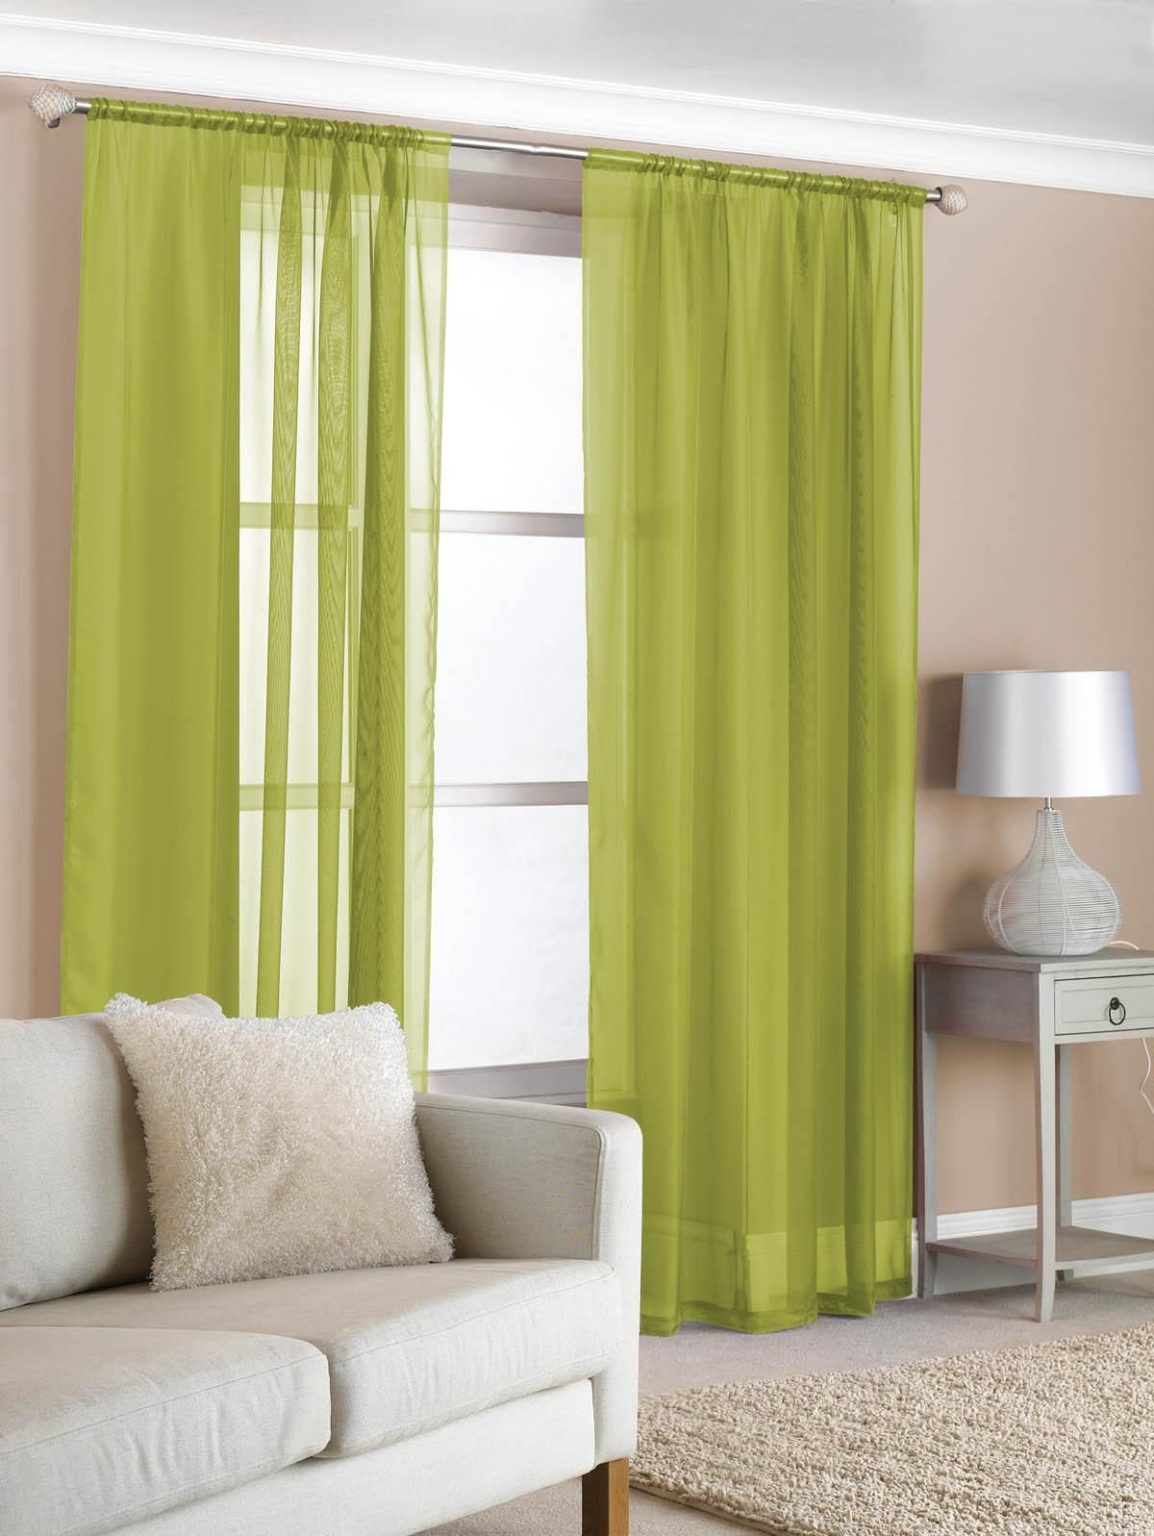 What Curtains Match Best With Your Wall Color?